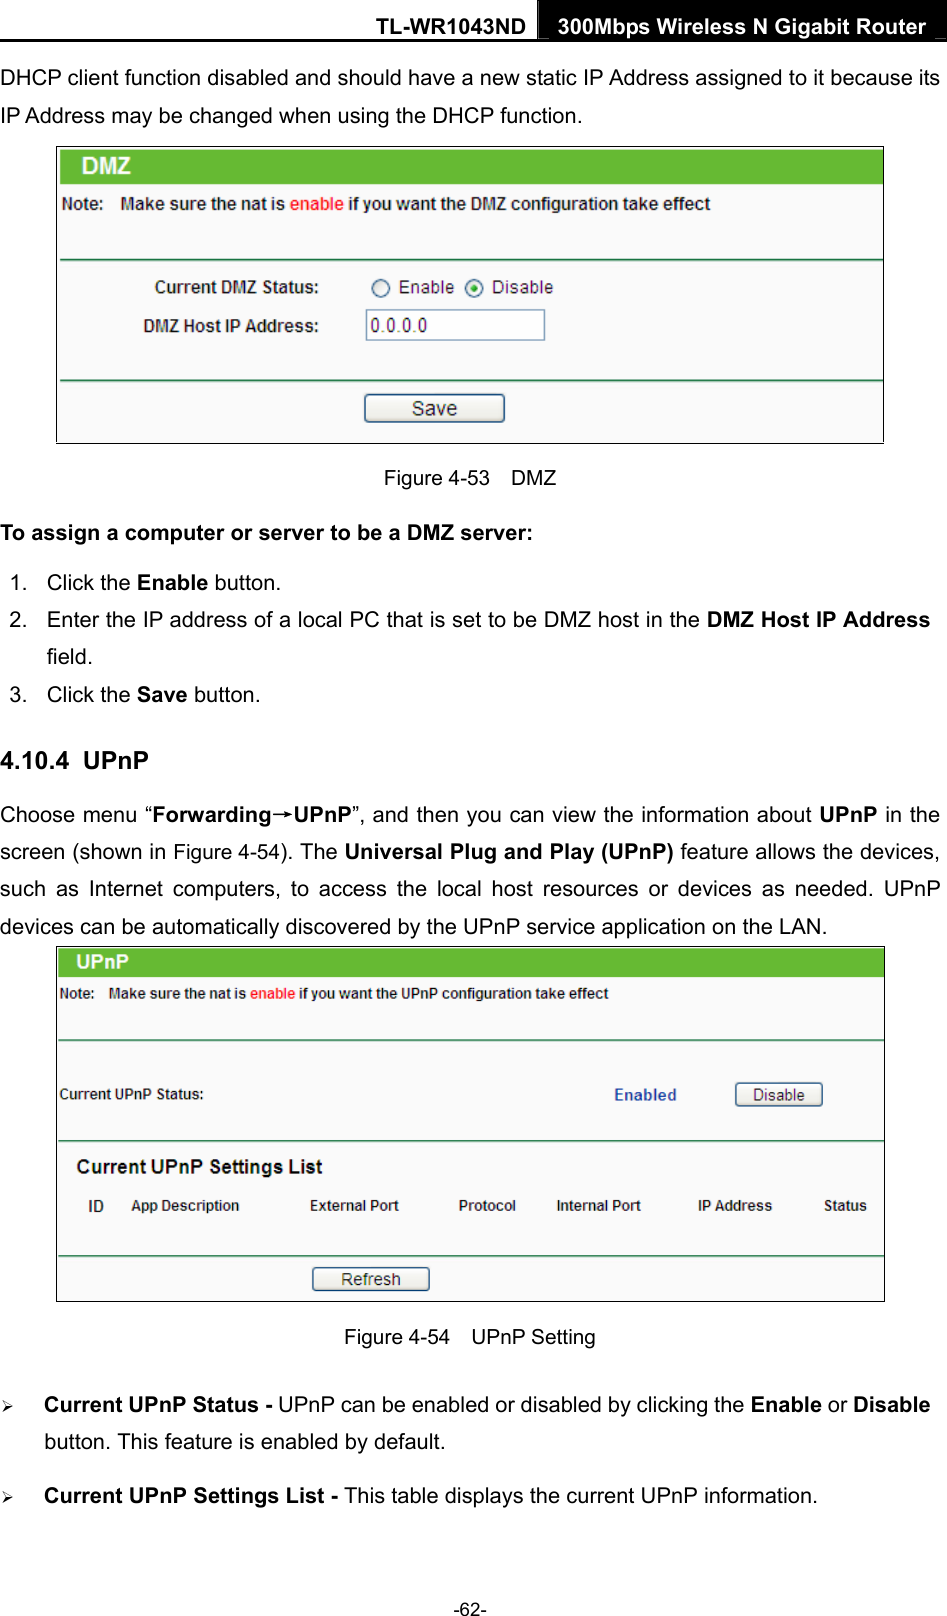 TL-WR1043ND 300Mbps Wireless N Gigabit Router  DHCP client function disabled and should have a new static IP Address assigned to it because its IP Address may be changed when using the DHCP function.  Figure 4-53  DMZ To assign a computer or server to be a DMZ server:   1. Click the Enable button.   2.  Enter the IP address of a local PC that is set to be DMZ host in the DMZ Host IP Address field.  3. Click the Save button.   4.10.4  UPnP Choose menu “Forwarding→UPnP”, and then you can view the information about UPnP in the screen (shown in Figure 4-54). The Universal Plug and Play (UPnP) feature allows the devices, such as Internet computers, to access the local host resources or devices as needed. UPnP devices can be automatically discovered by the UPnP service application on the LAN.  Figure 4-54  UPnP Setting ¾ Current UPnP Status - UPnP can be enabled or disabled by clicking the Enable or Disable button. This feature is enabled by default. ¾ Current UPnP Settings List - This table displays the current UPnP information. -62- 